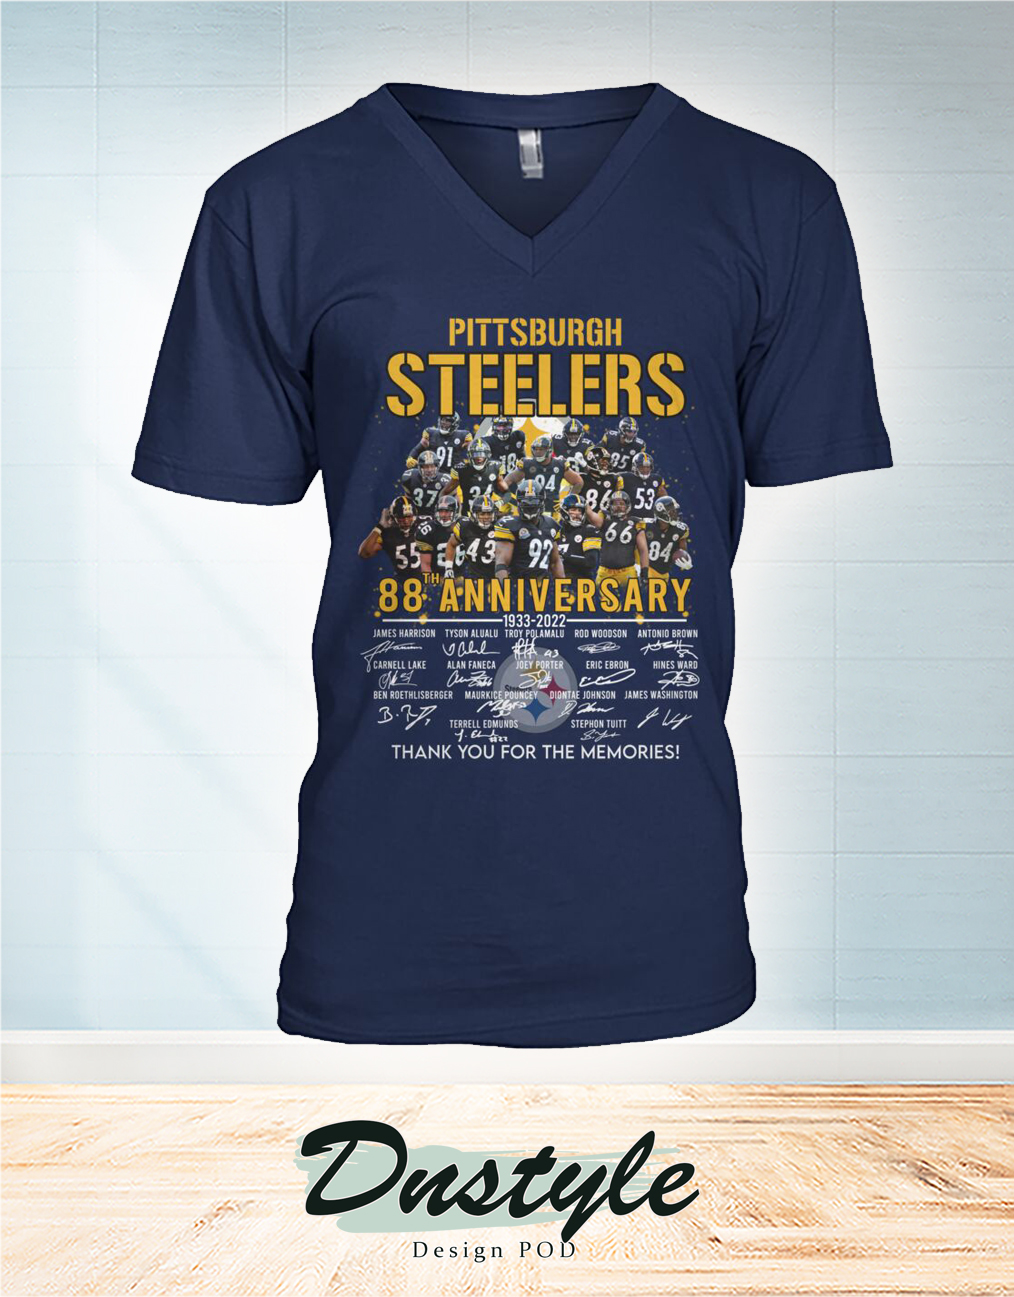 Pittsburgh steelers 88 anniversary signature thank you for the memories v-neck